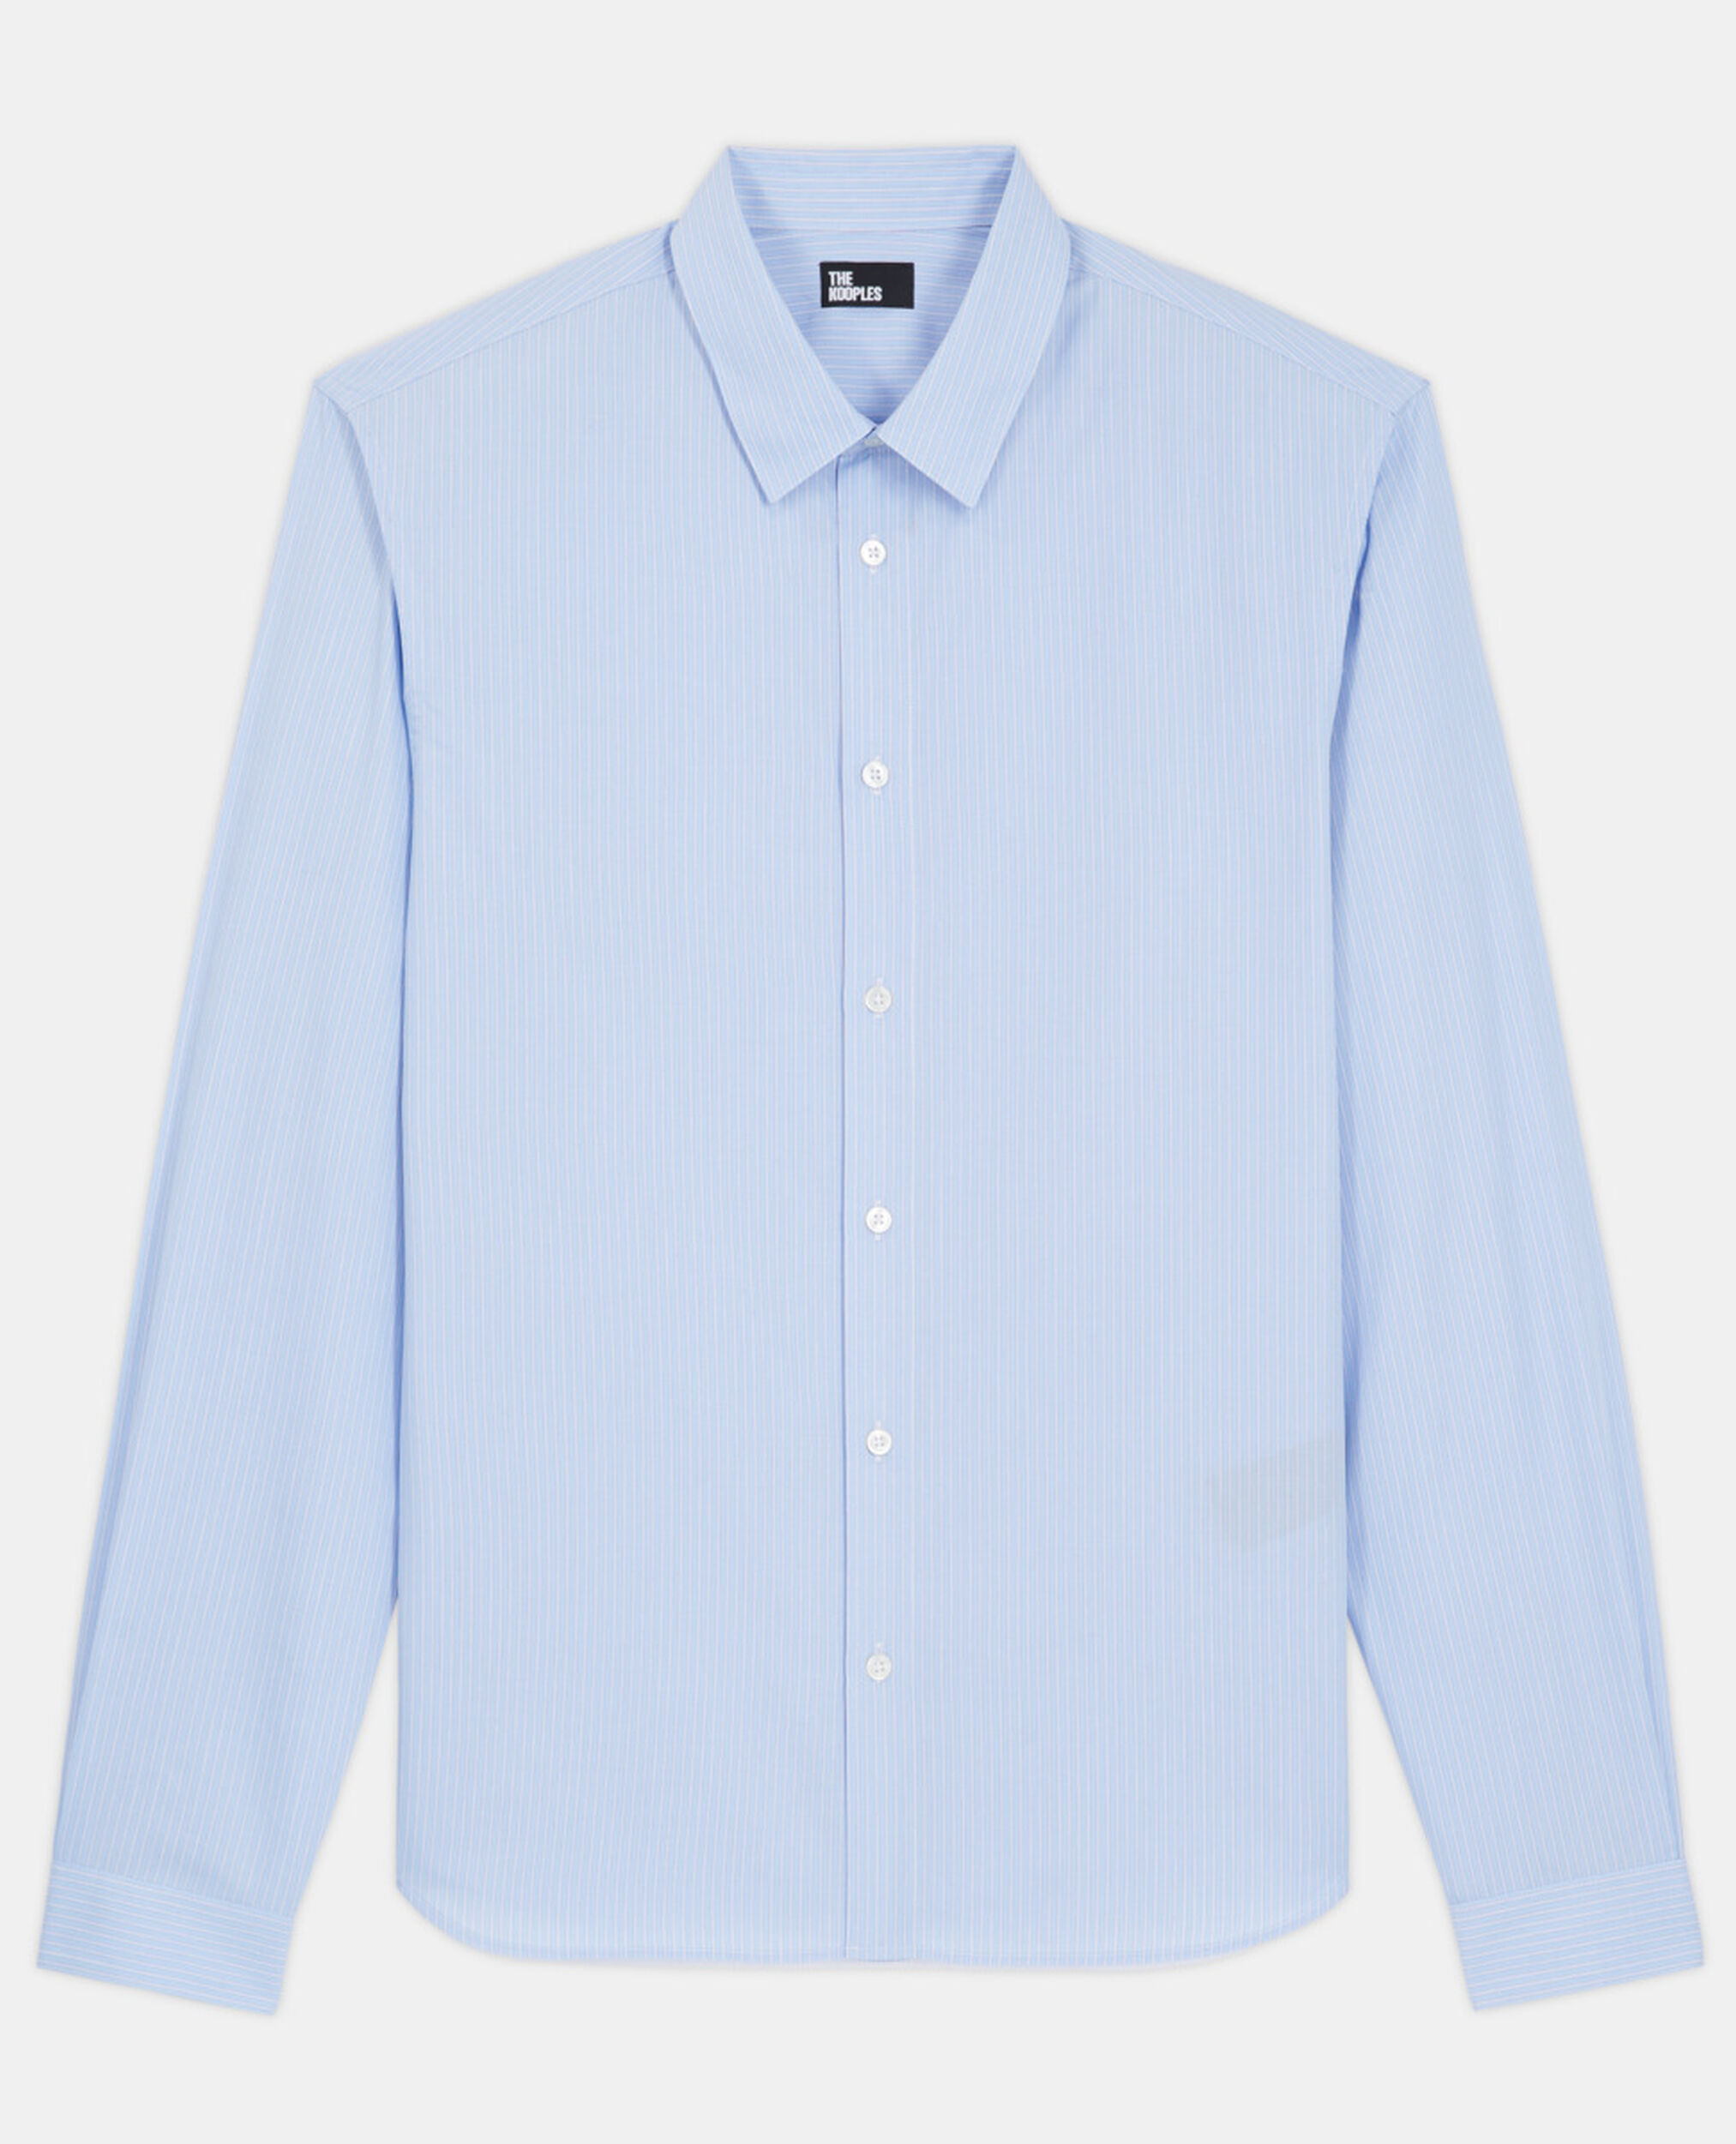 Chemise col classique à rayures, WHITE / SKY BLUE, hi-res image number null